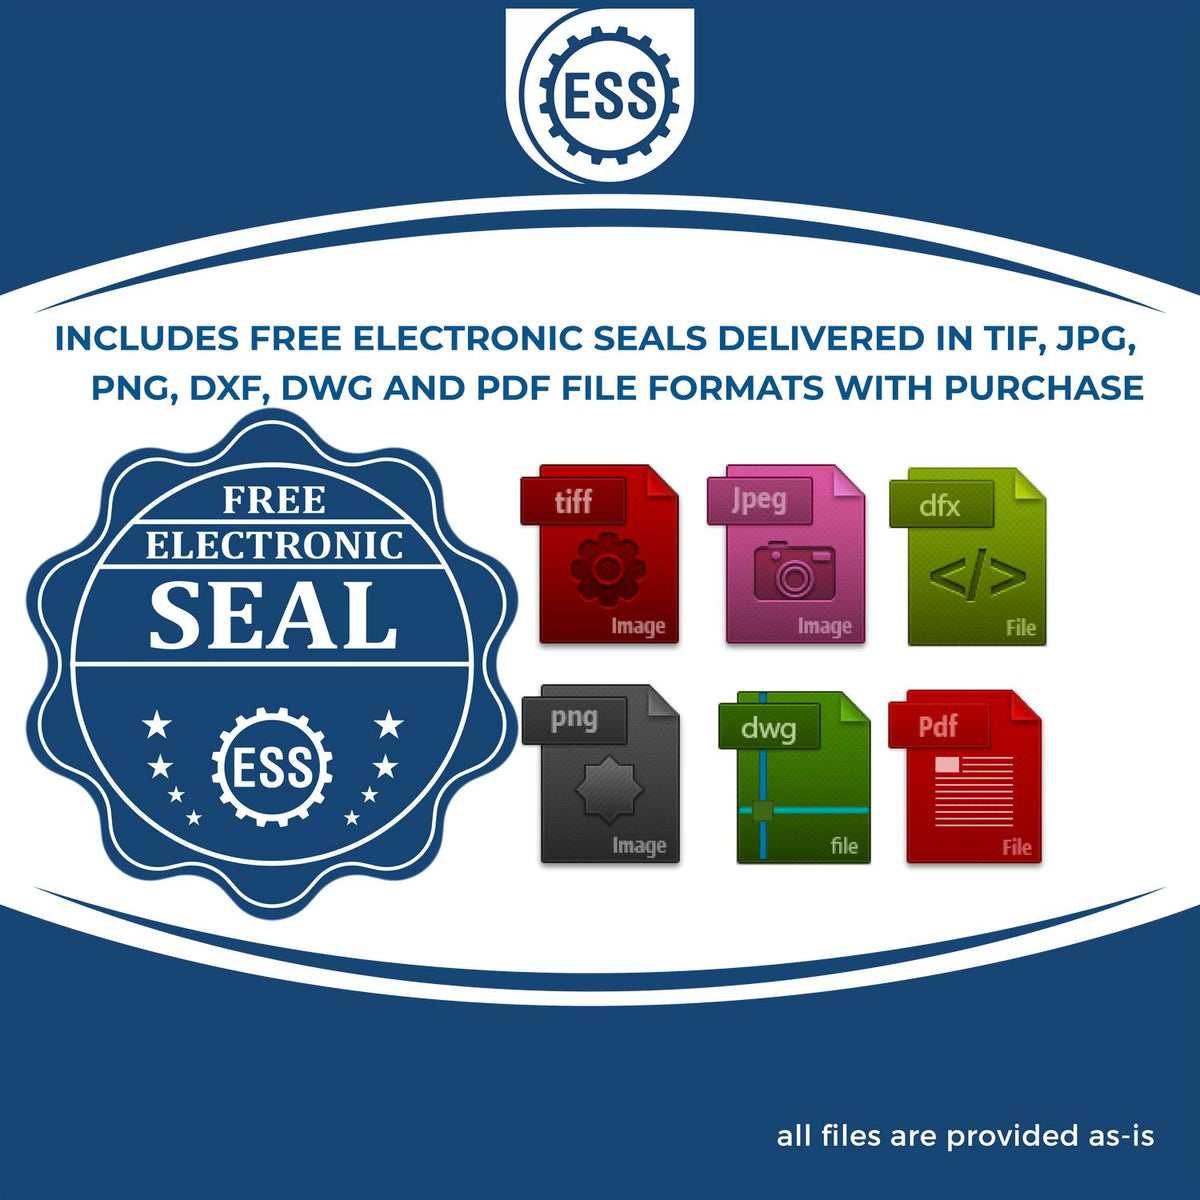 An infographic for the free electronic seal for the Hybrid Michigan Land Surveyor Seal illustrating the different file type icons such as DXF, DWG, TIF, JPG and PNG.